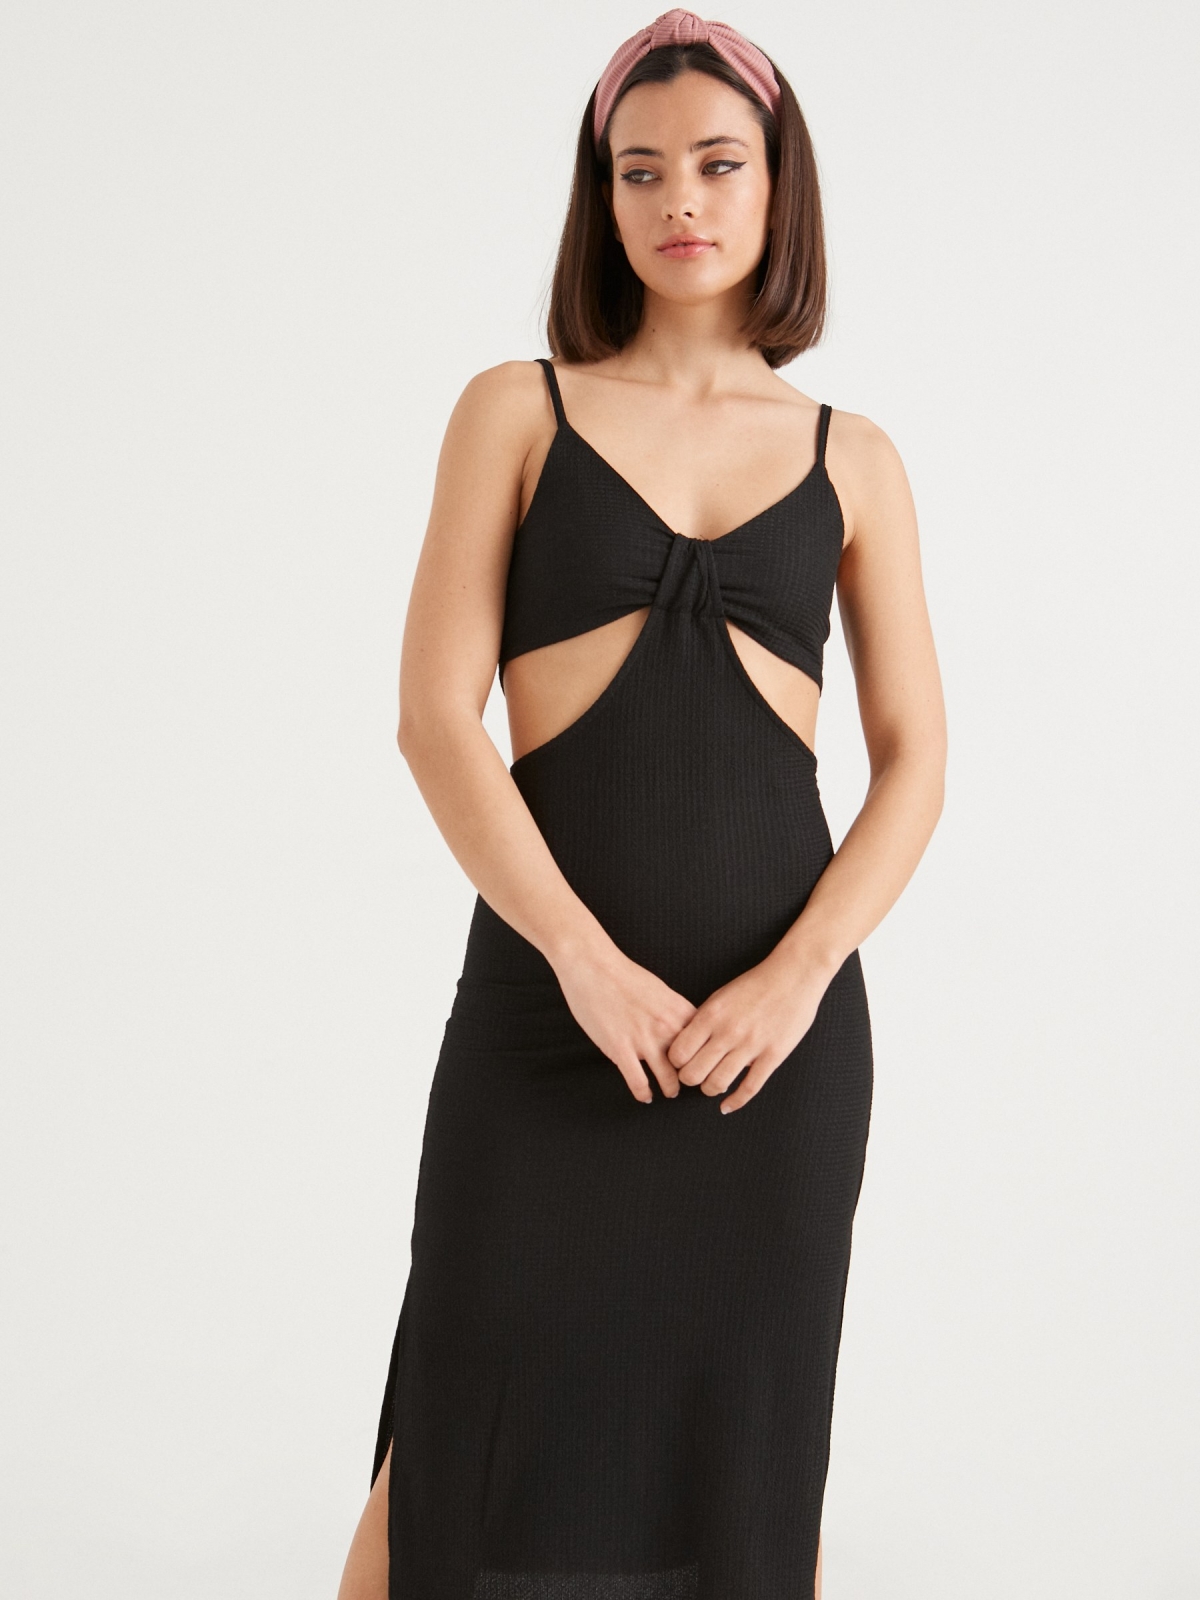 Cut-out midi dress black middle front view